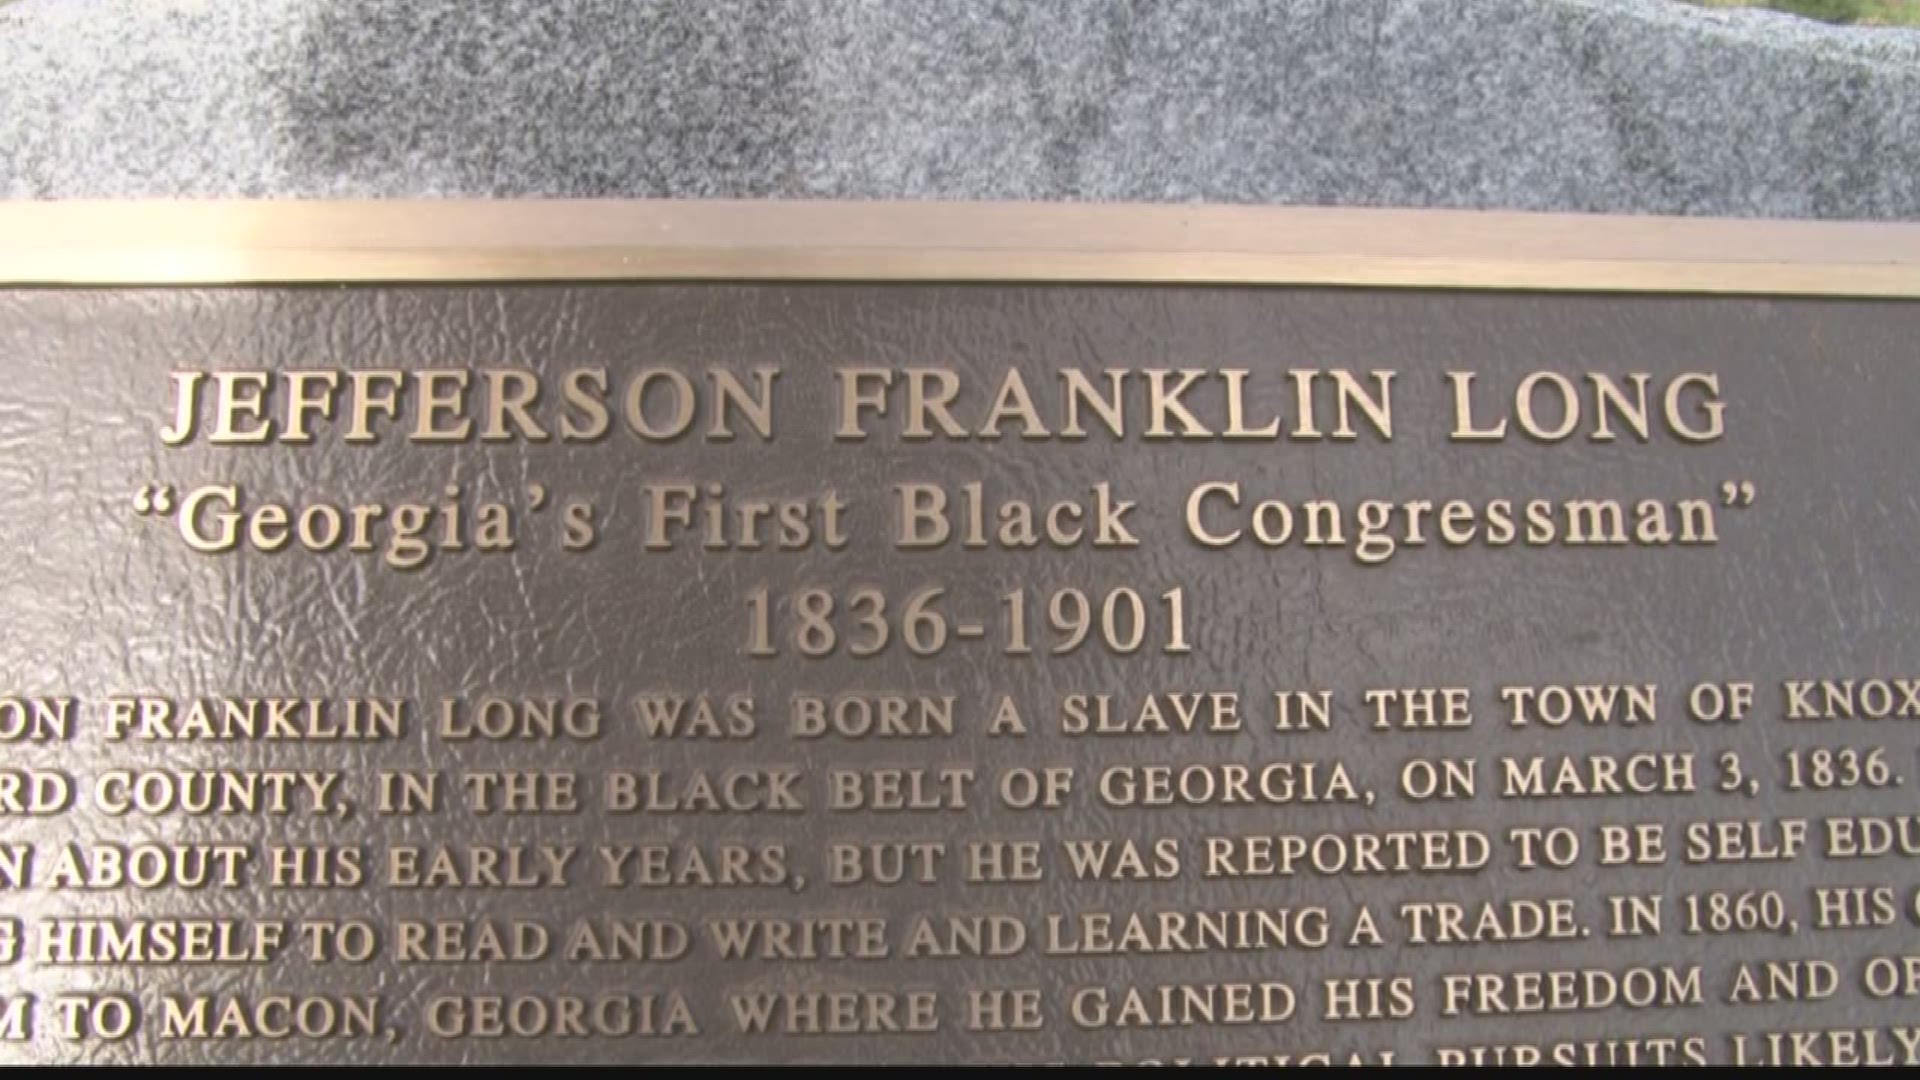 Jefferson Long was Georgia's first black congressman, and he's from Macon. He taught himself how to read and write and owned a tailoring business.